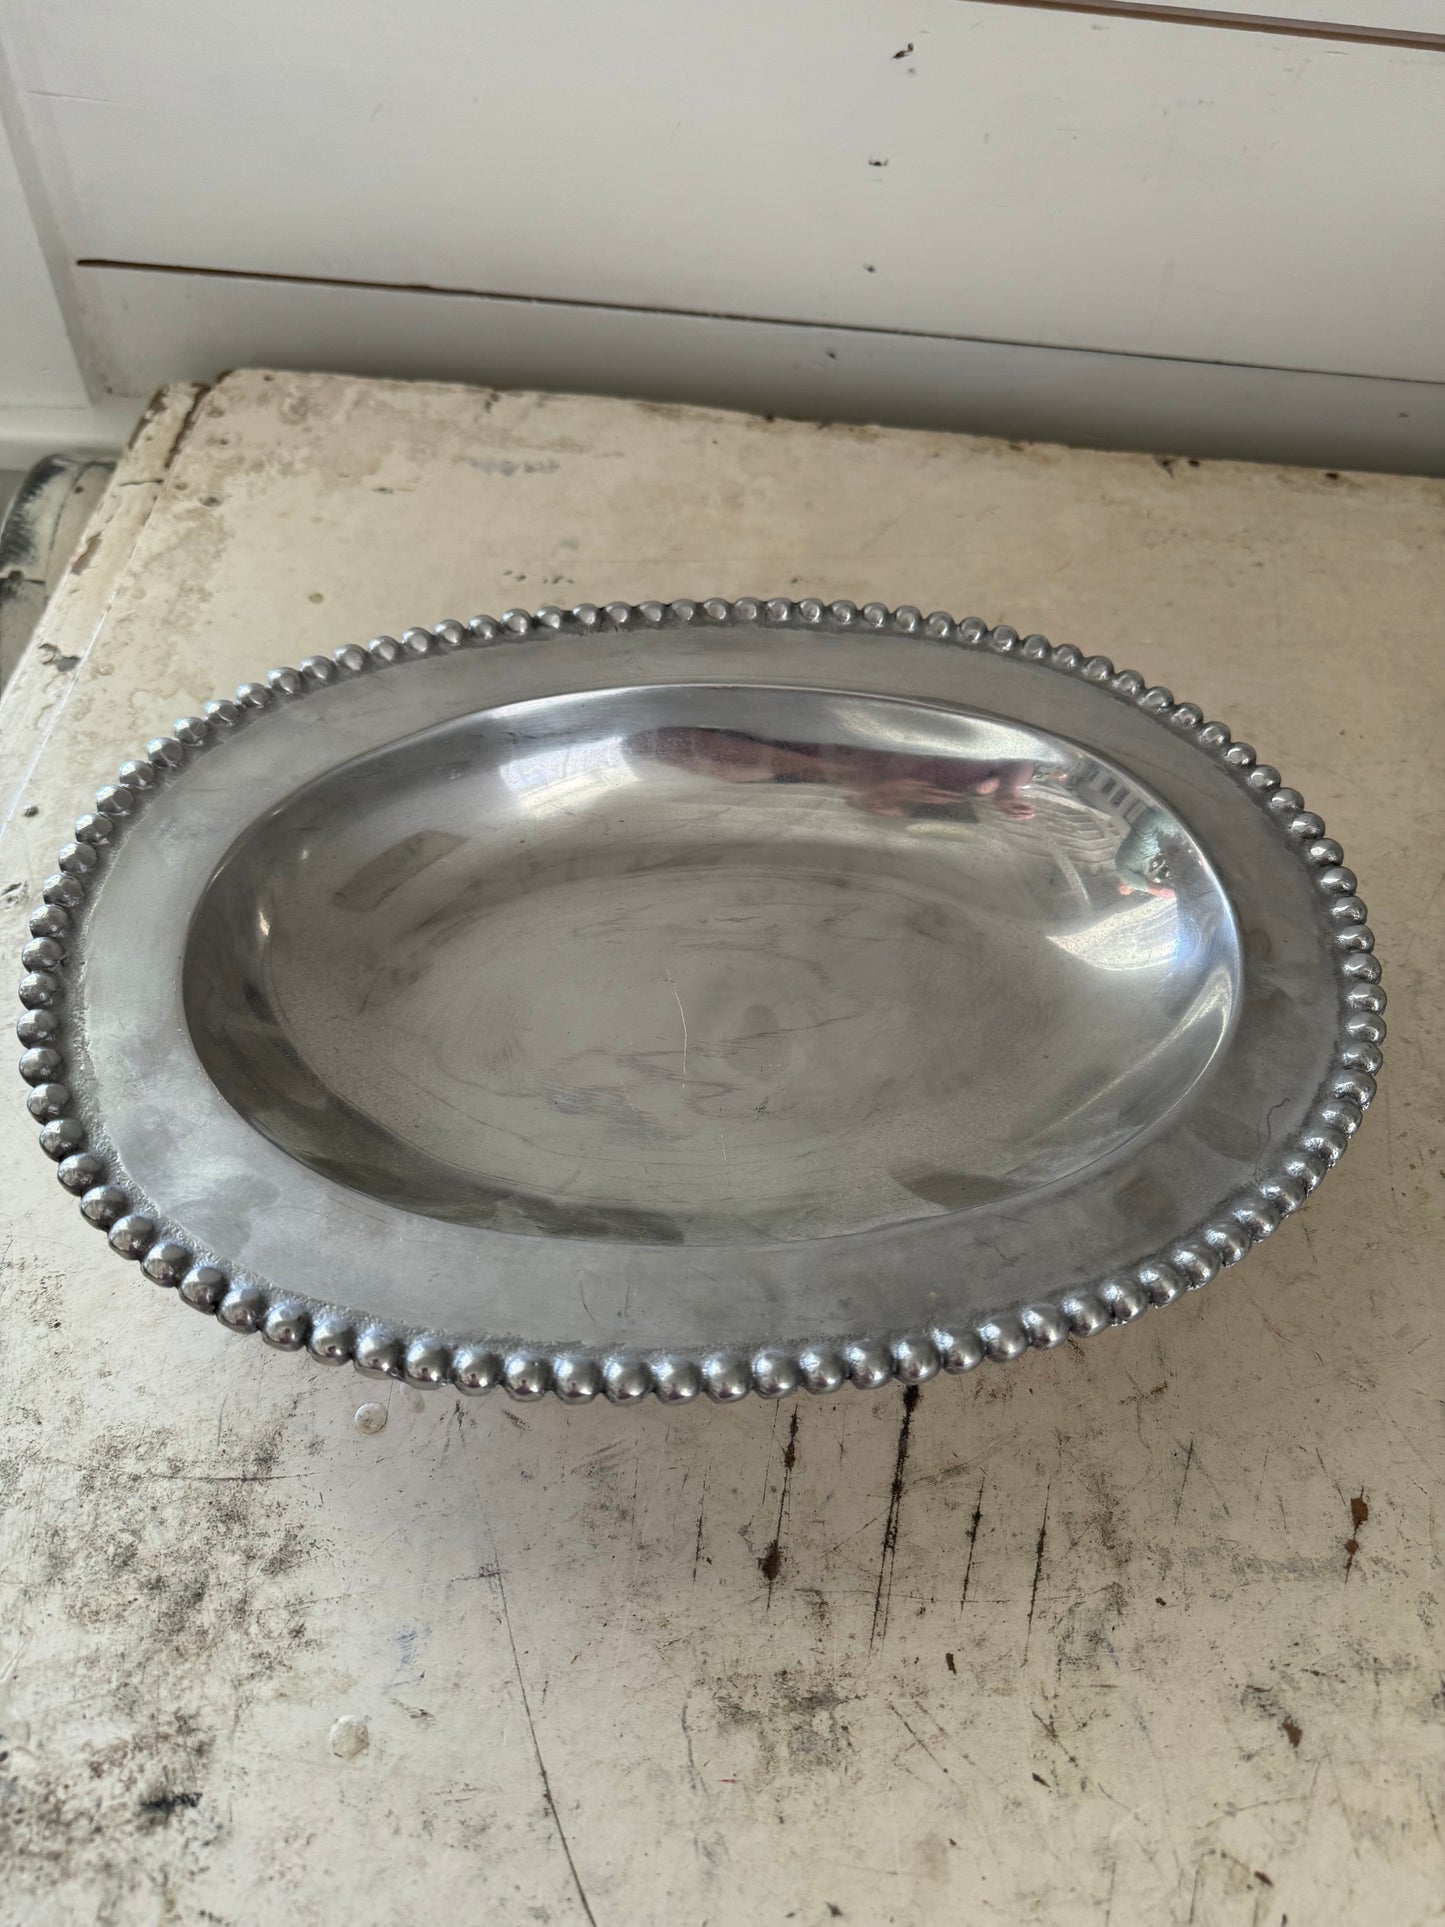 Aluminum decor round and oval dish sold individually